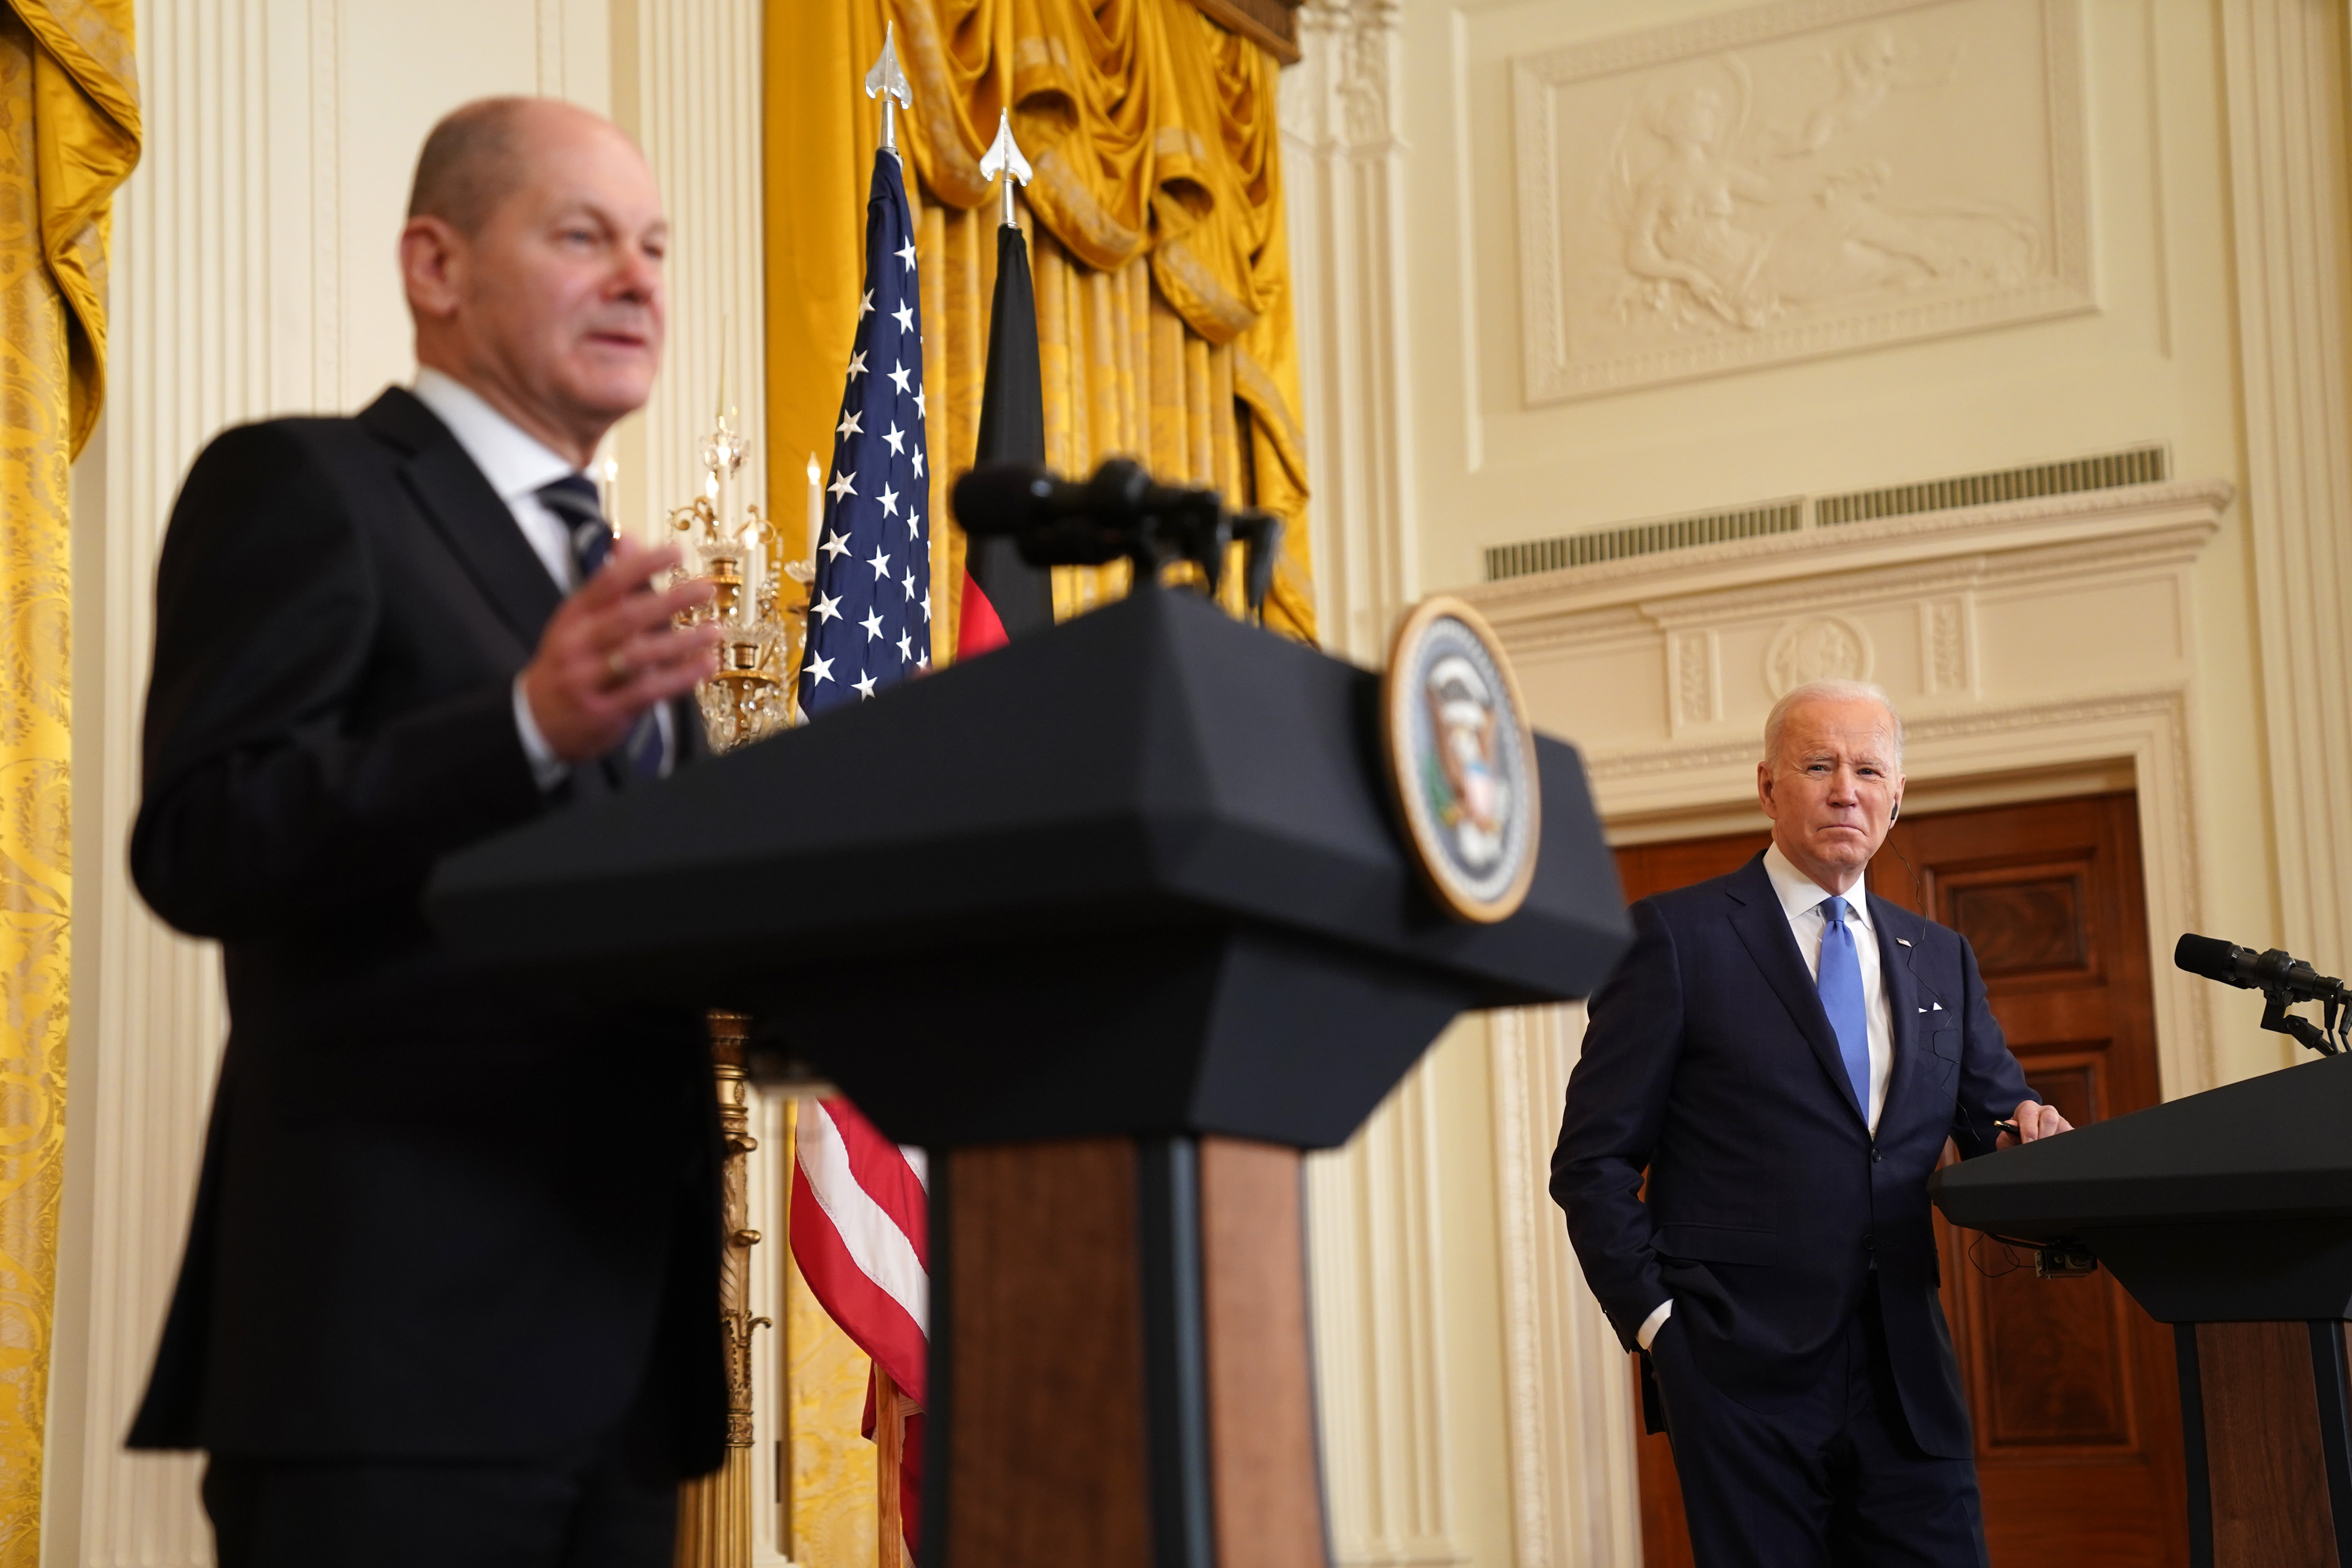 U.S. President Joe Biden, right, during a news conference with Olaf Scholz, Germany's chancellor, in the East Room of the White House in Washington, D.C., U.S., on Monday, Feb. 7 2022. Biden met with Scholz to discuss the situation with Ukraine amid questions over Germany's resolve to stand firm against Russia. Photographer: Leigh Vogel/UPI/Bloomberg via Getty Images